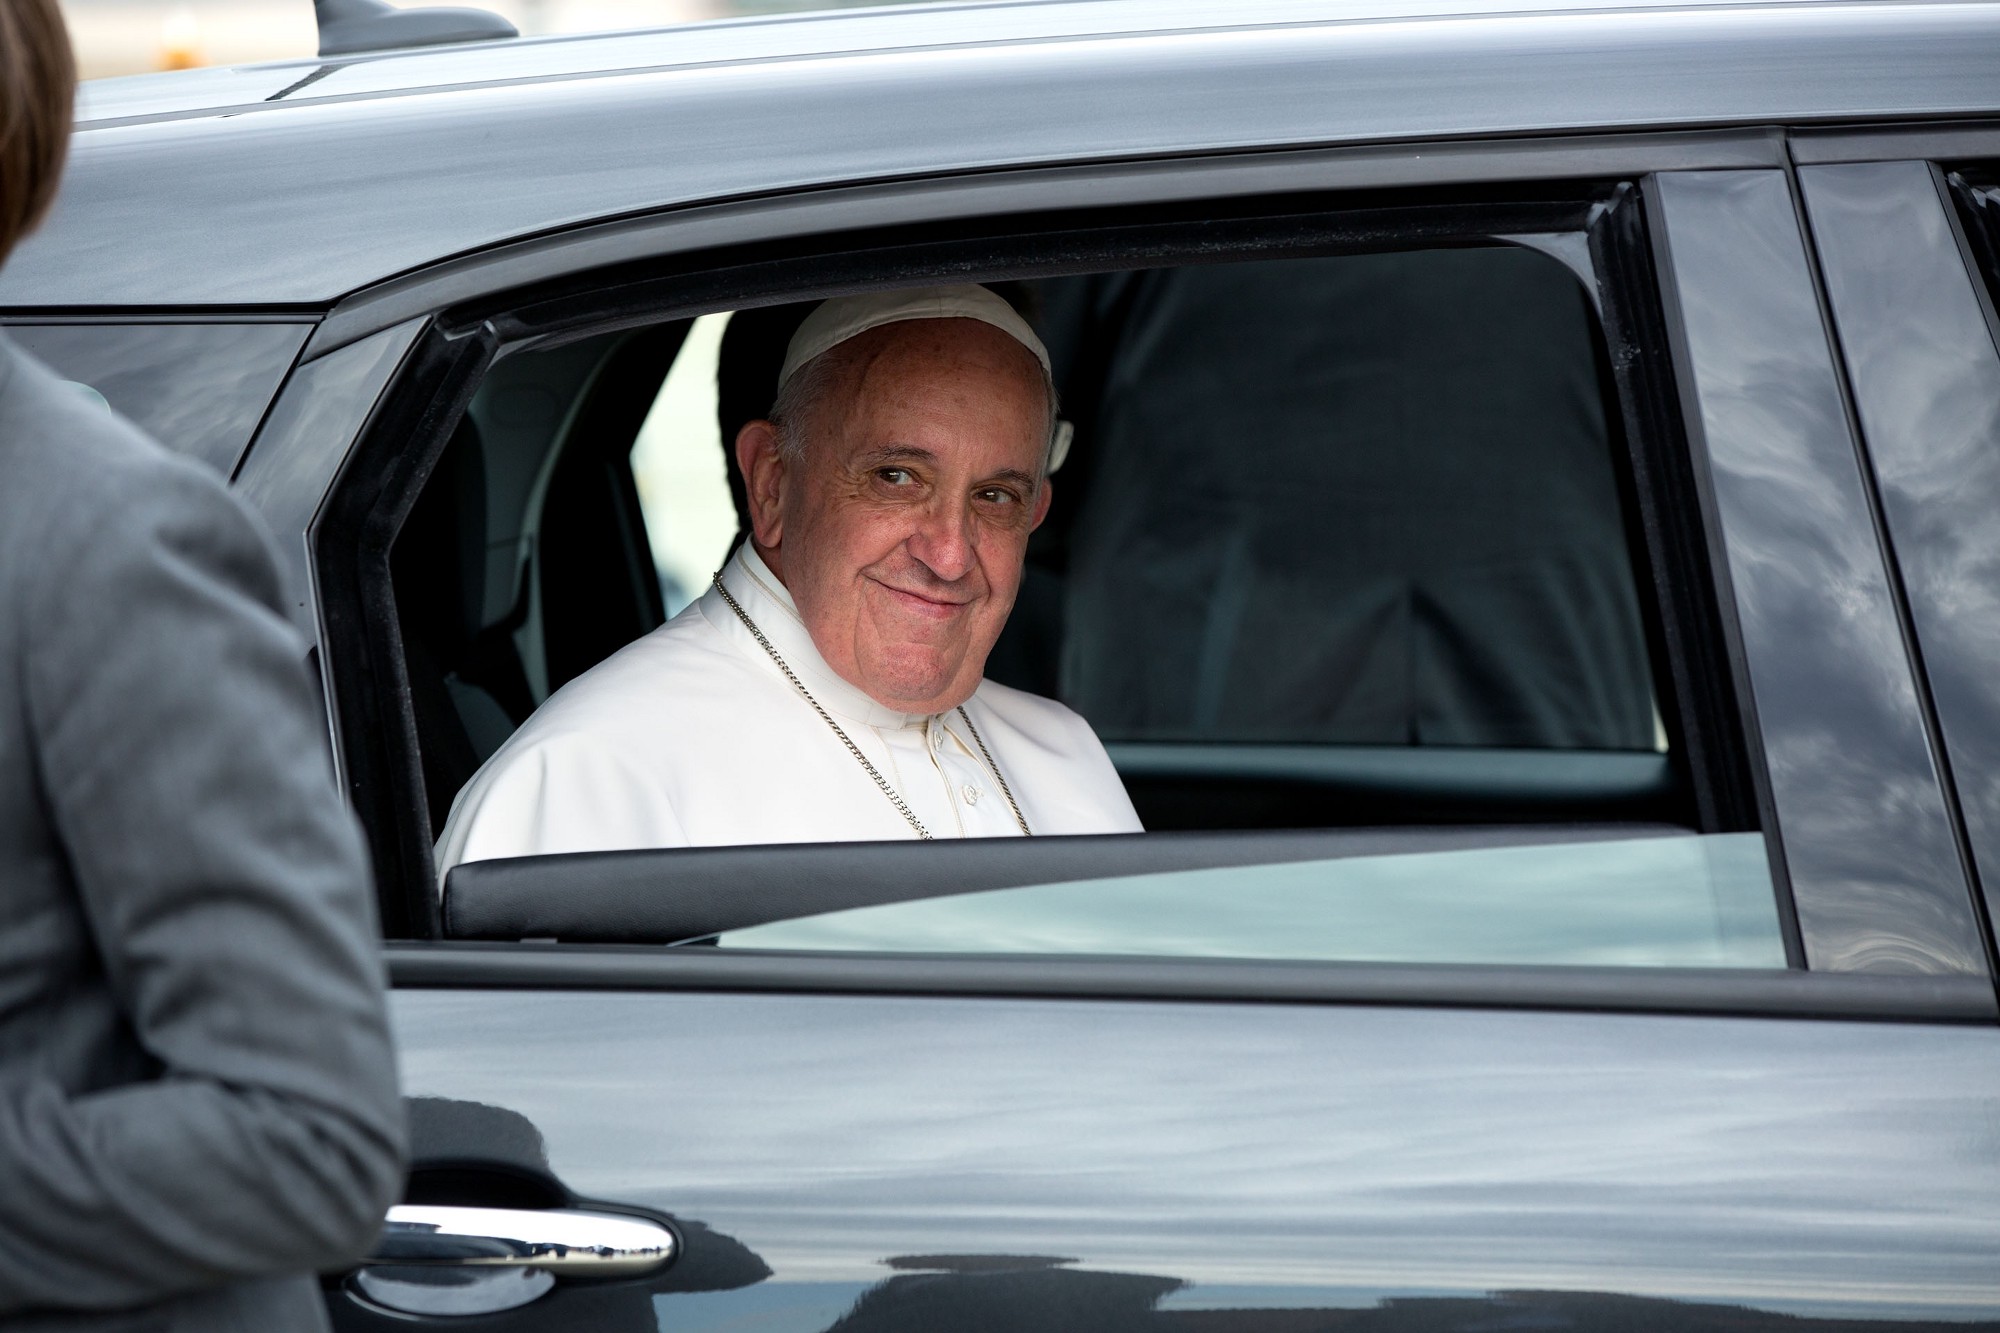 Pope Francis prepares to depart following his Arrival Ceremony. (Official White House Photo by Pete Souza)